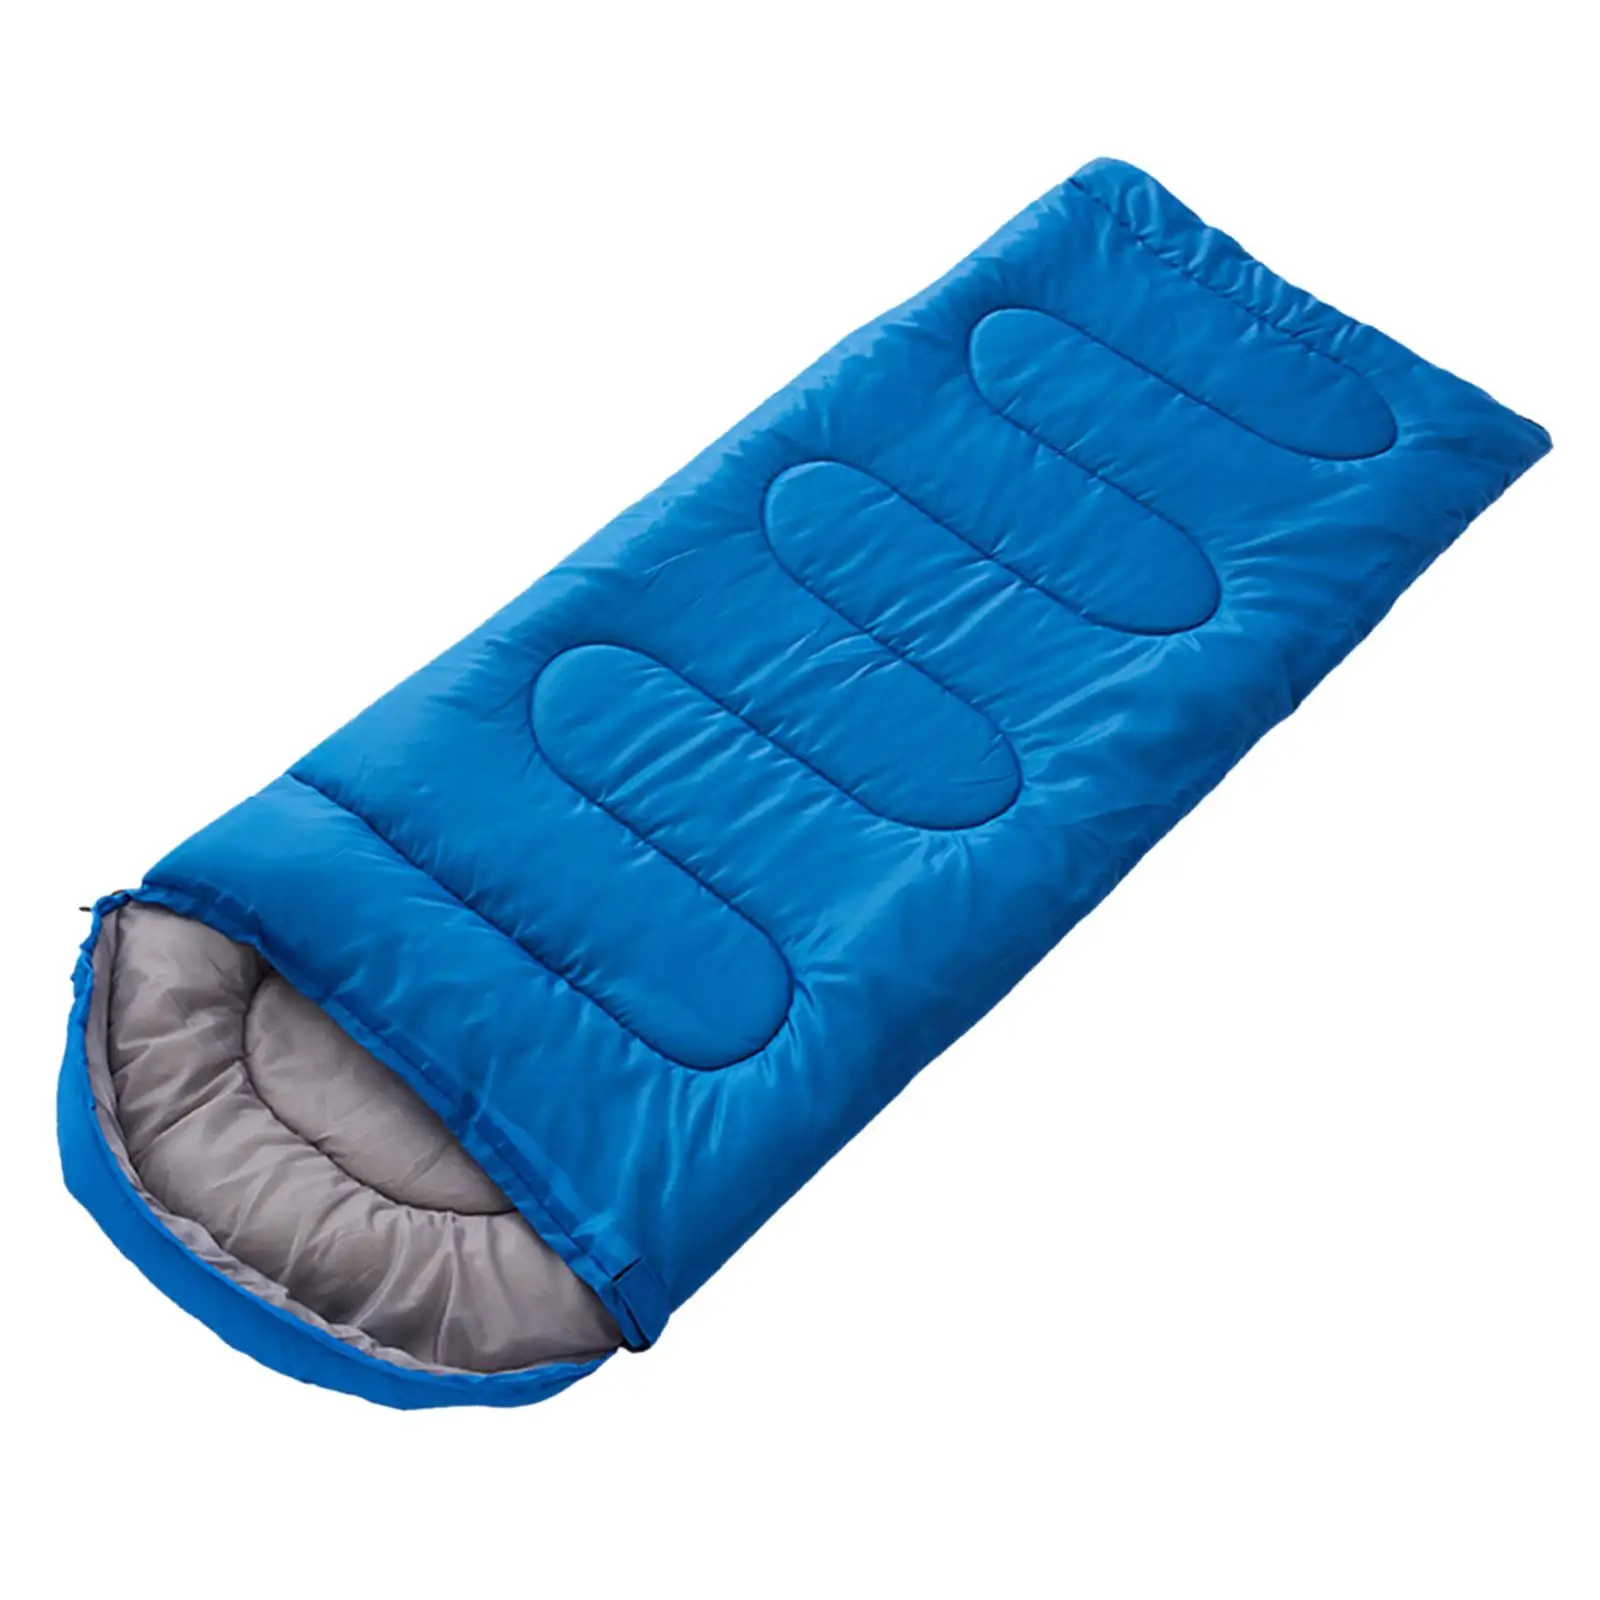 Wide Travel Sleeping Bag Polyester Warm Zip Padded Bag Comfortable for Outdoor Weather Office Indoor